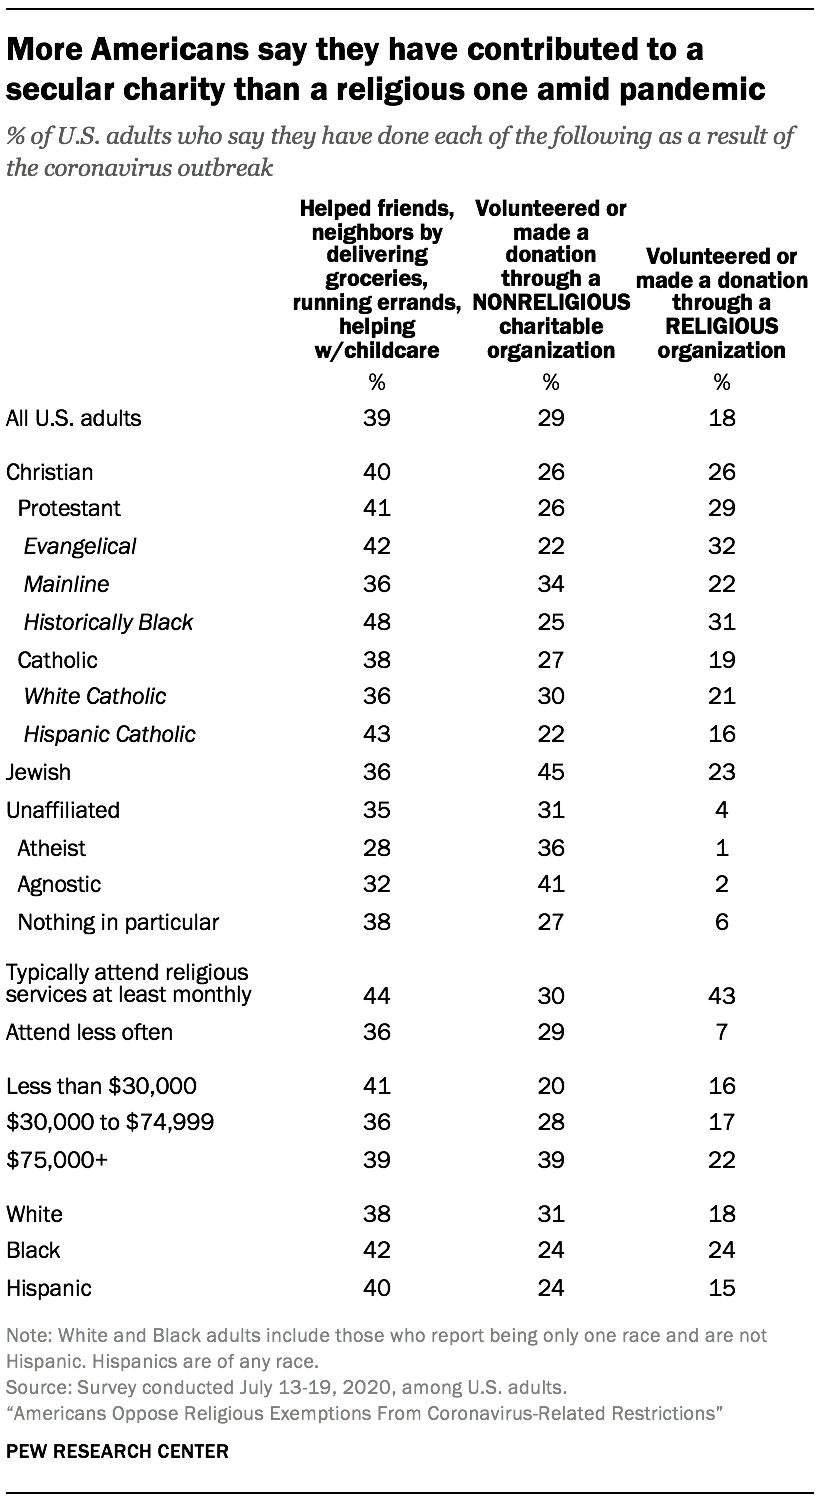 More Americans say they have contributed to a secular charity than a religious one amid pandemic